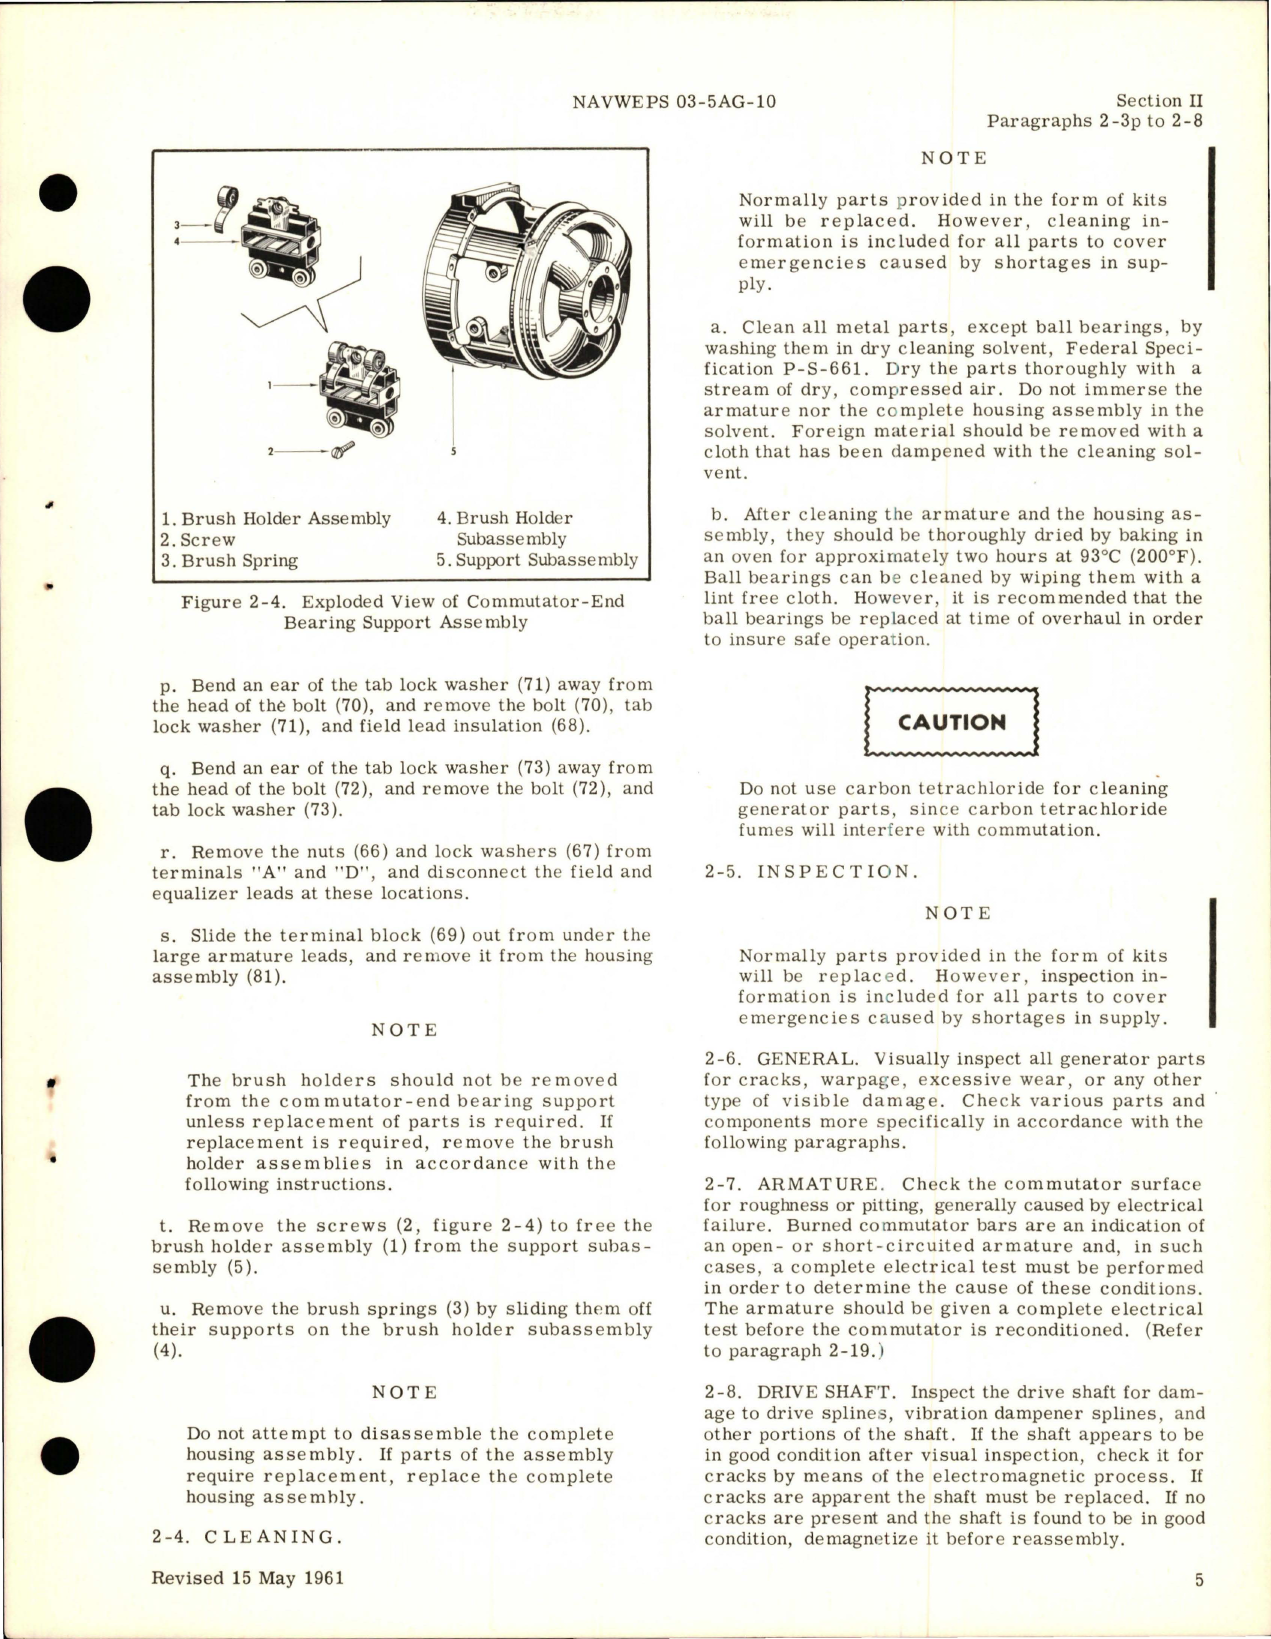 Sample page 7 from AirCorps Library document: Overhaul Instructions for Generator - Models G300, G300-3, G300-3C, G300-4A, G300-4B, G300-4BS, G300-6BT, and G300-600A